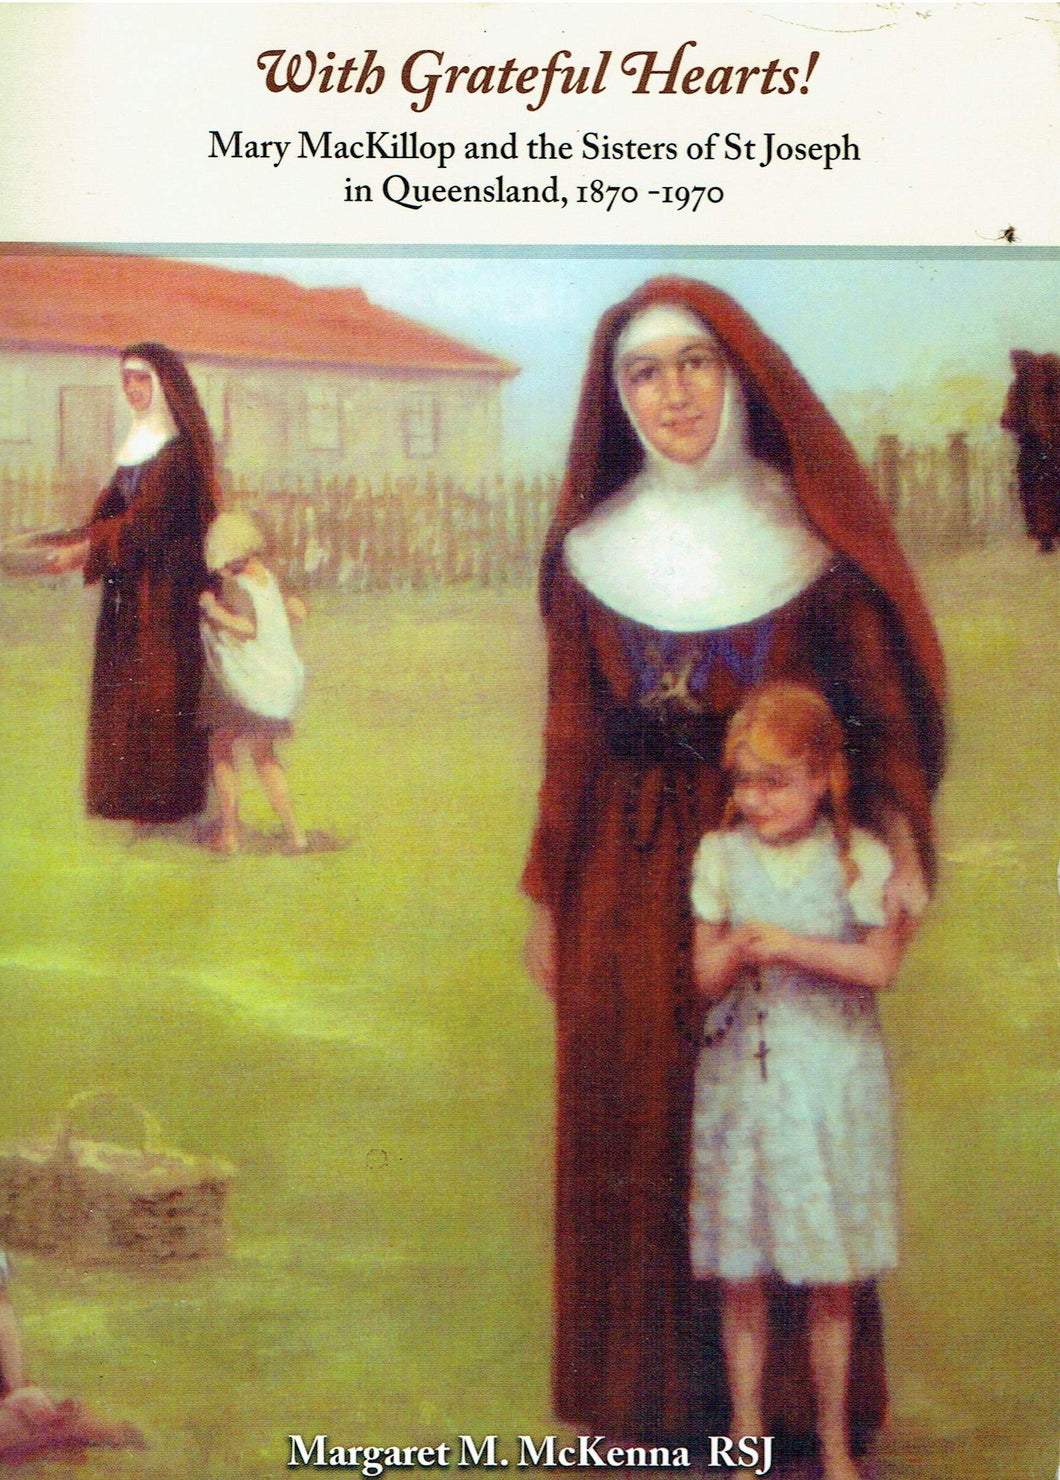 With Grateful Hearts! Mary MacKillop and the Sisters of St Joseph in Queensland, 1870-1970